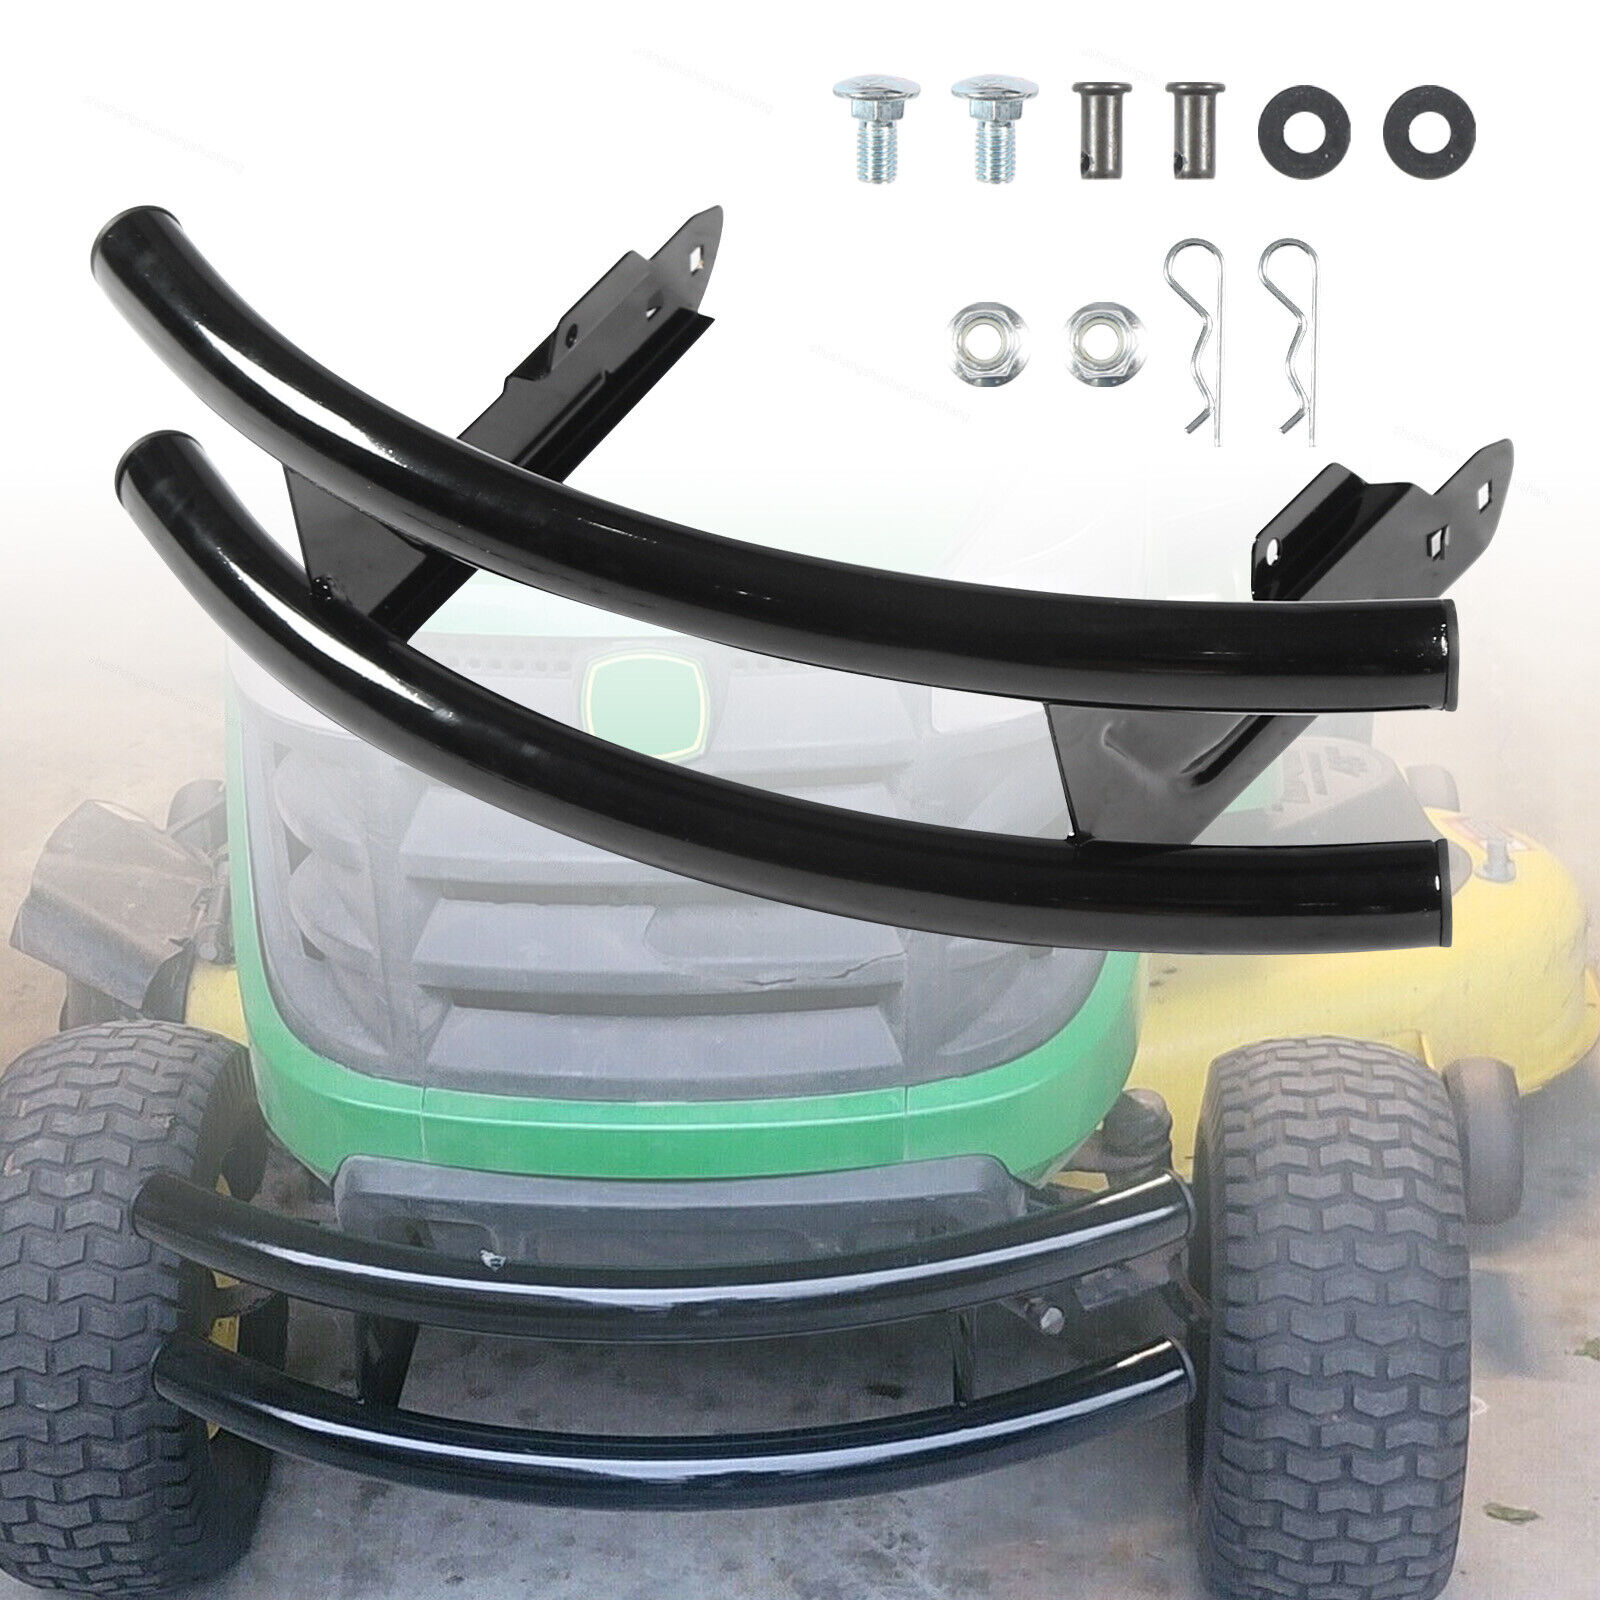 2-Bar Front Bumper Guard Lawn Protection Fit For John Deere 100 Series BG20944